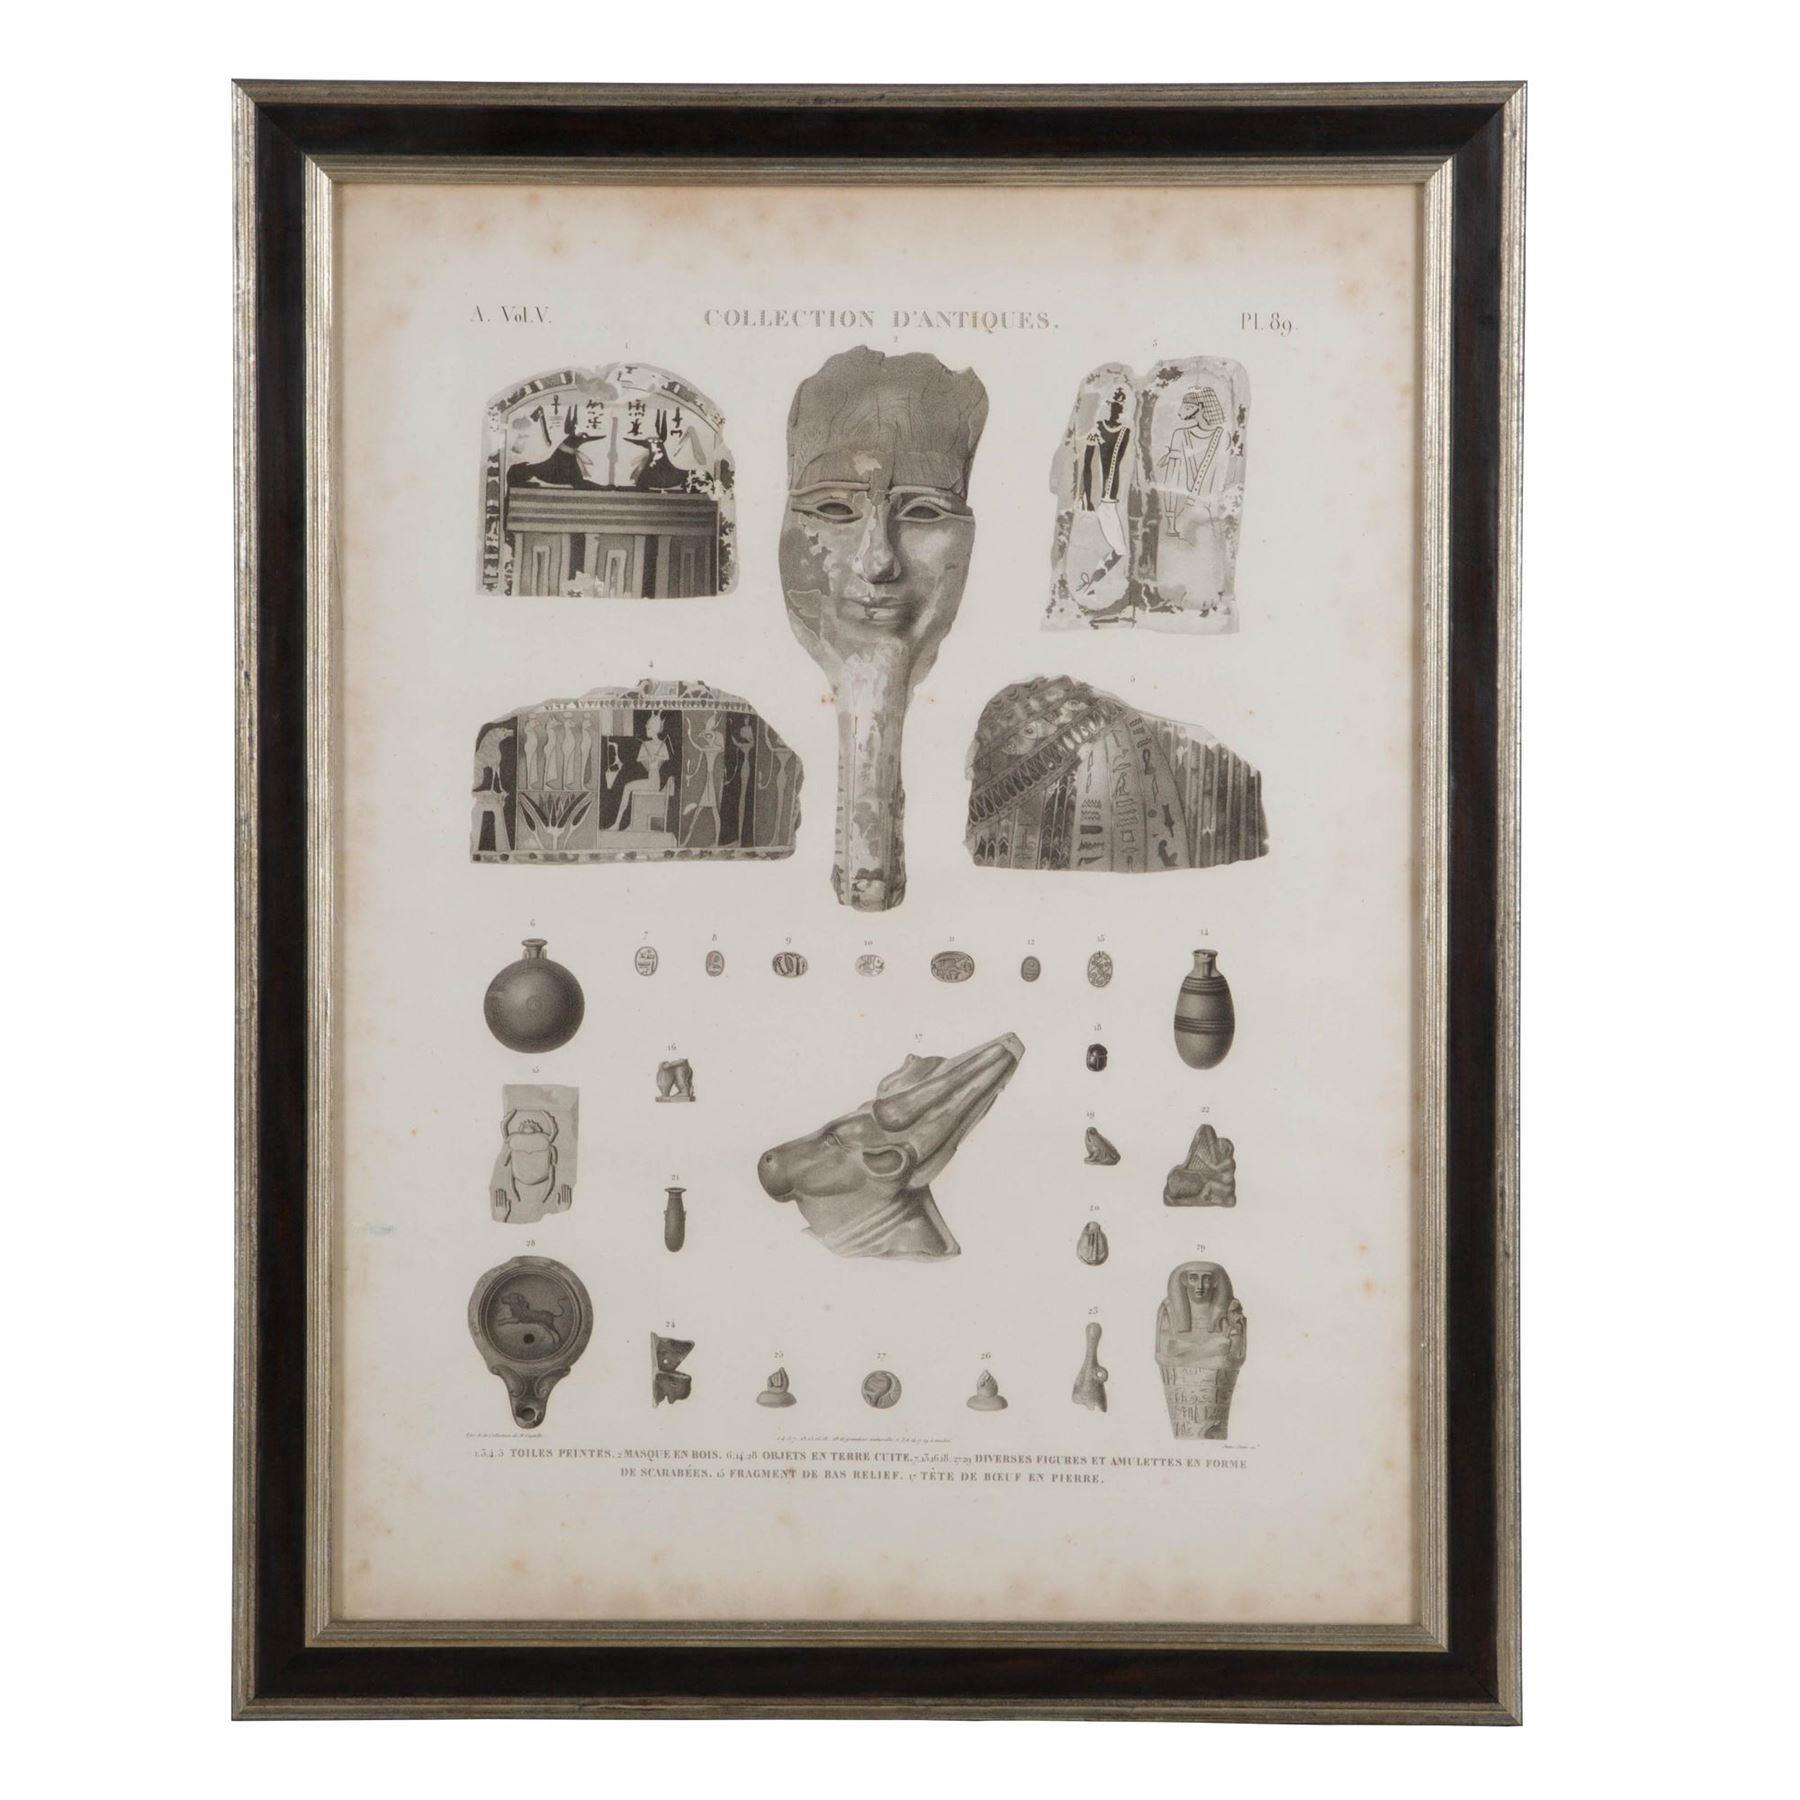 Three framed early 19th century first edition prints - 'Description de L'Egypt'. After Napoleon conquered Egypt in the early 1800s he sent teams of artists down to Egypt to record everything there from the flora ,fauna, local costume, architecture